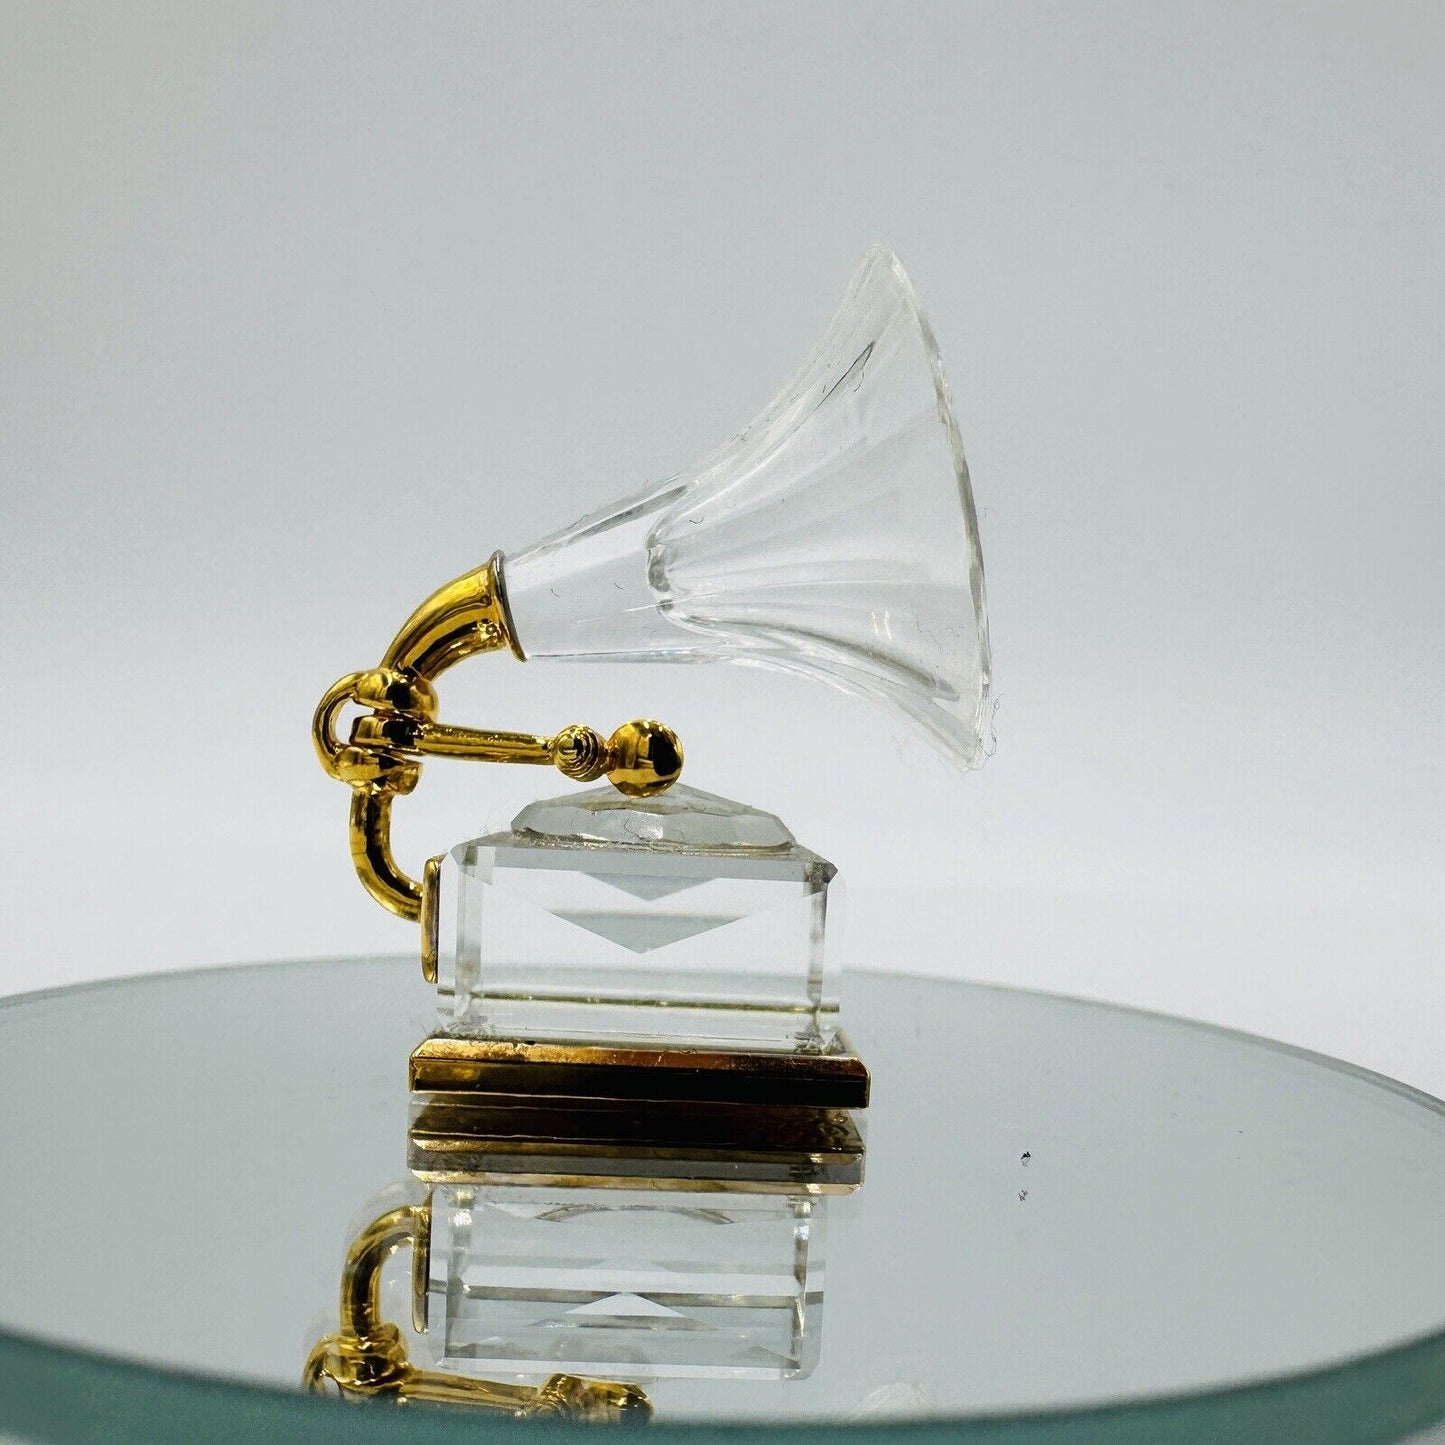 Swarovski Crystal Austria Memories OLD PHONOGRAPH Gold Accents Retired